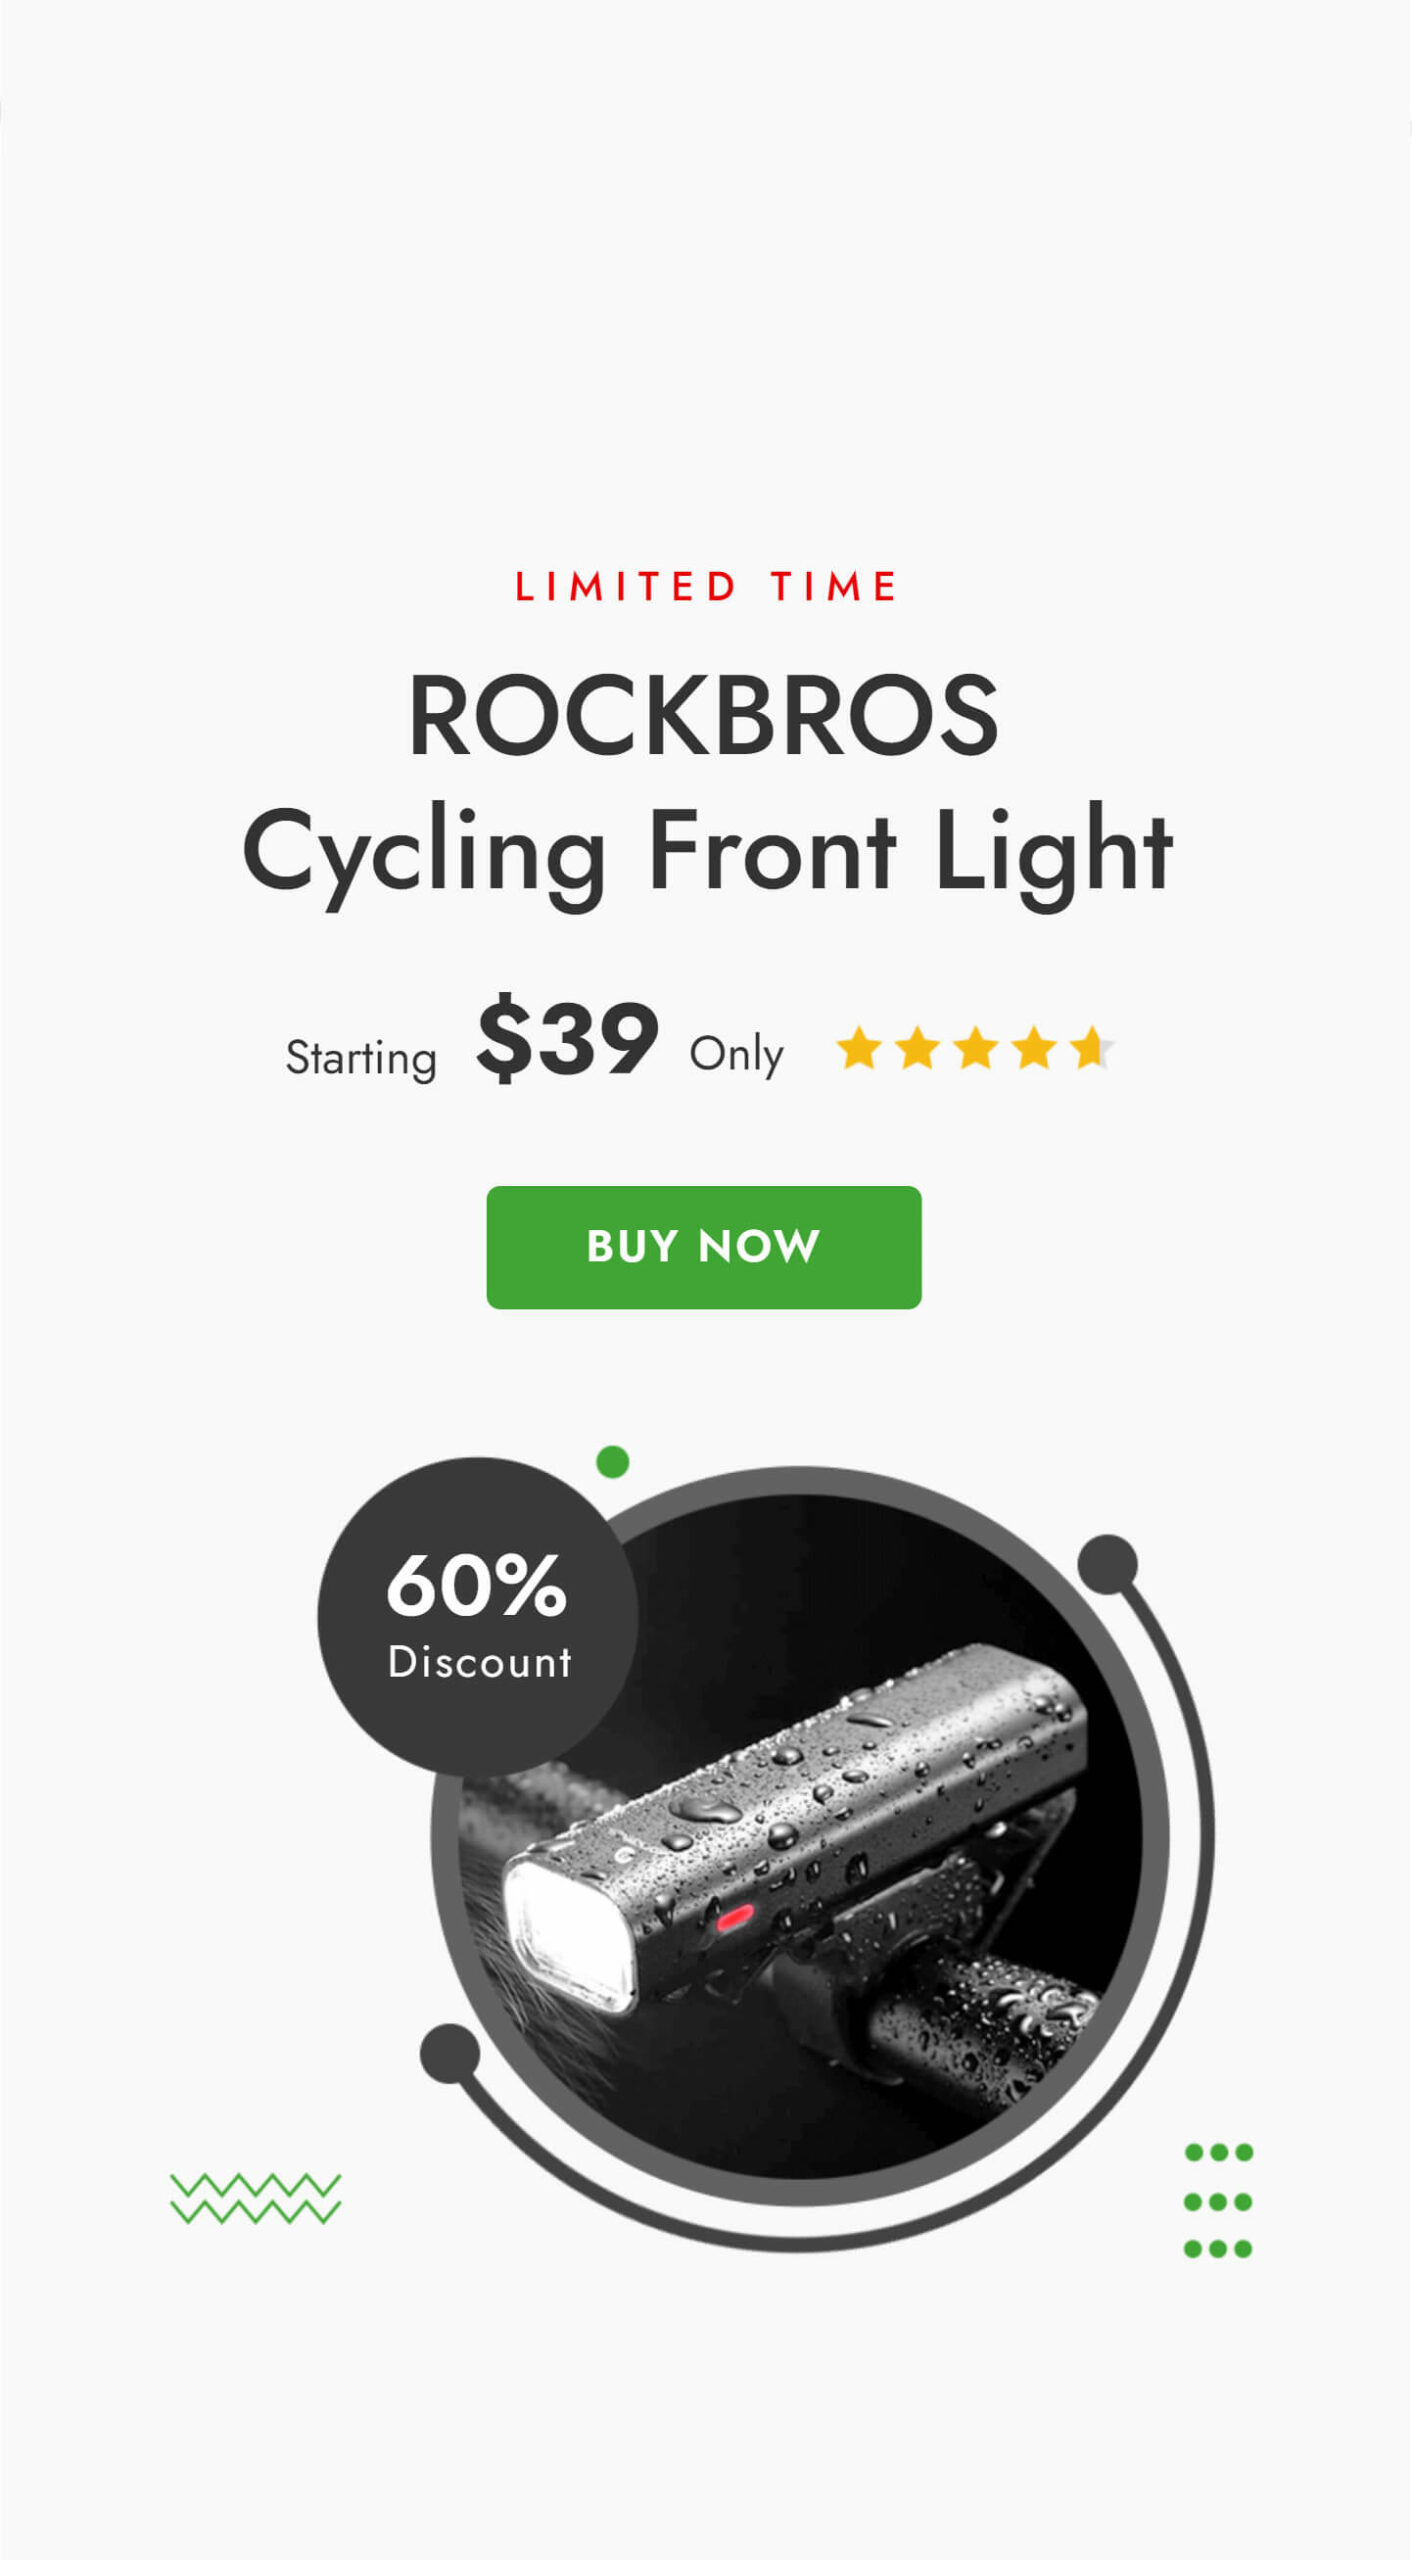 ROCKBROS Cycling Front Light Extra Small scaled